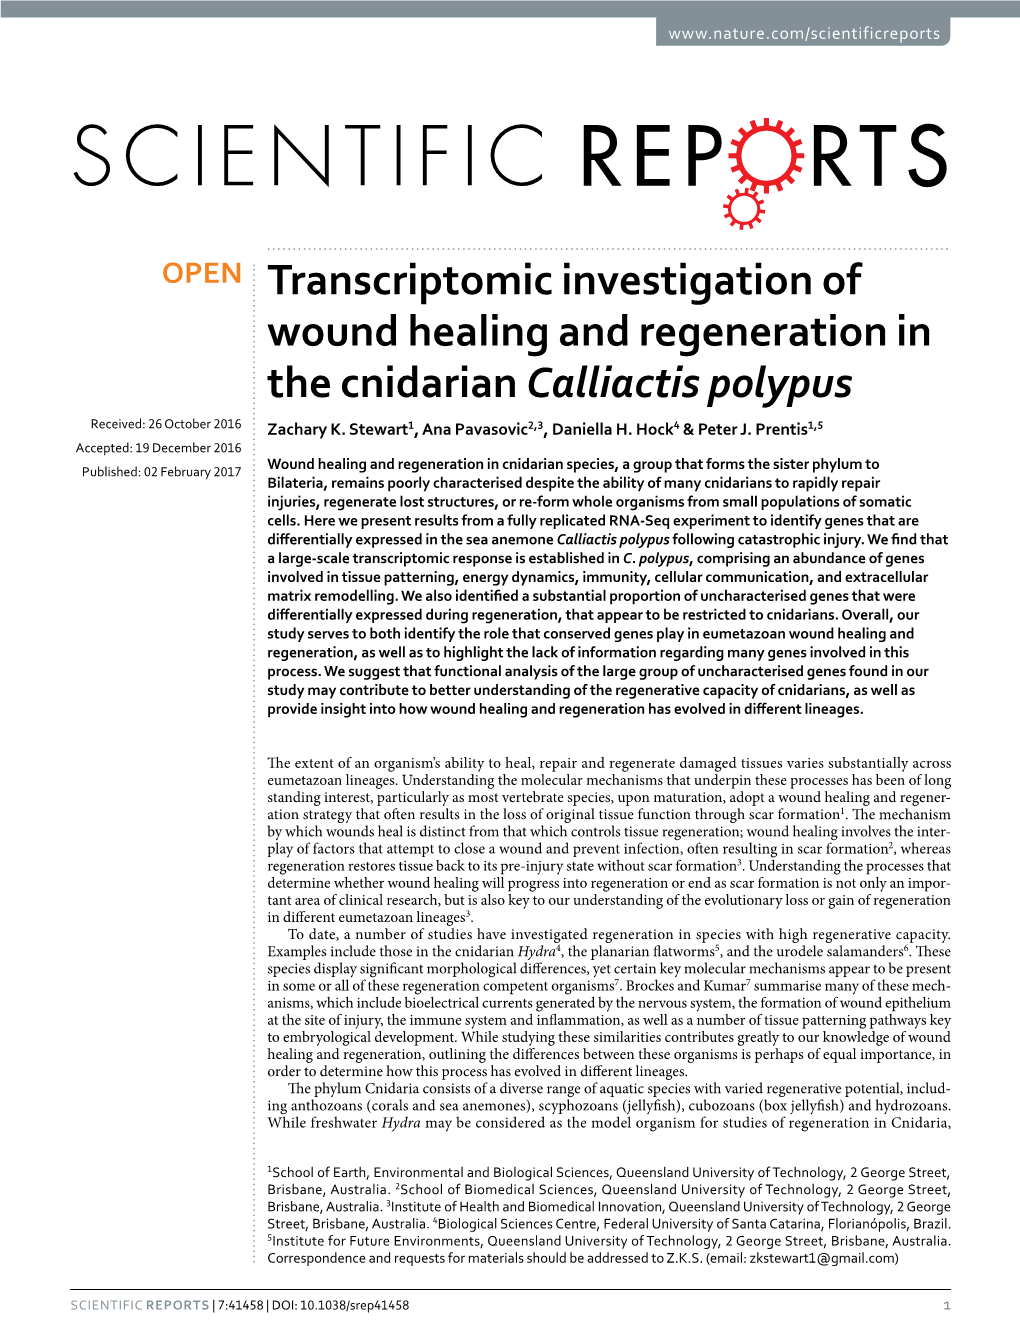 Transcriptomic Investigation of Wound Healing and Regeneration in the Cnidarian Calliactis Polypus Received: 26 October 2016 Zachary K